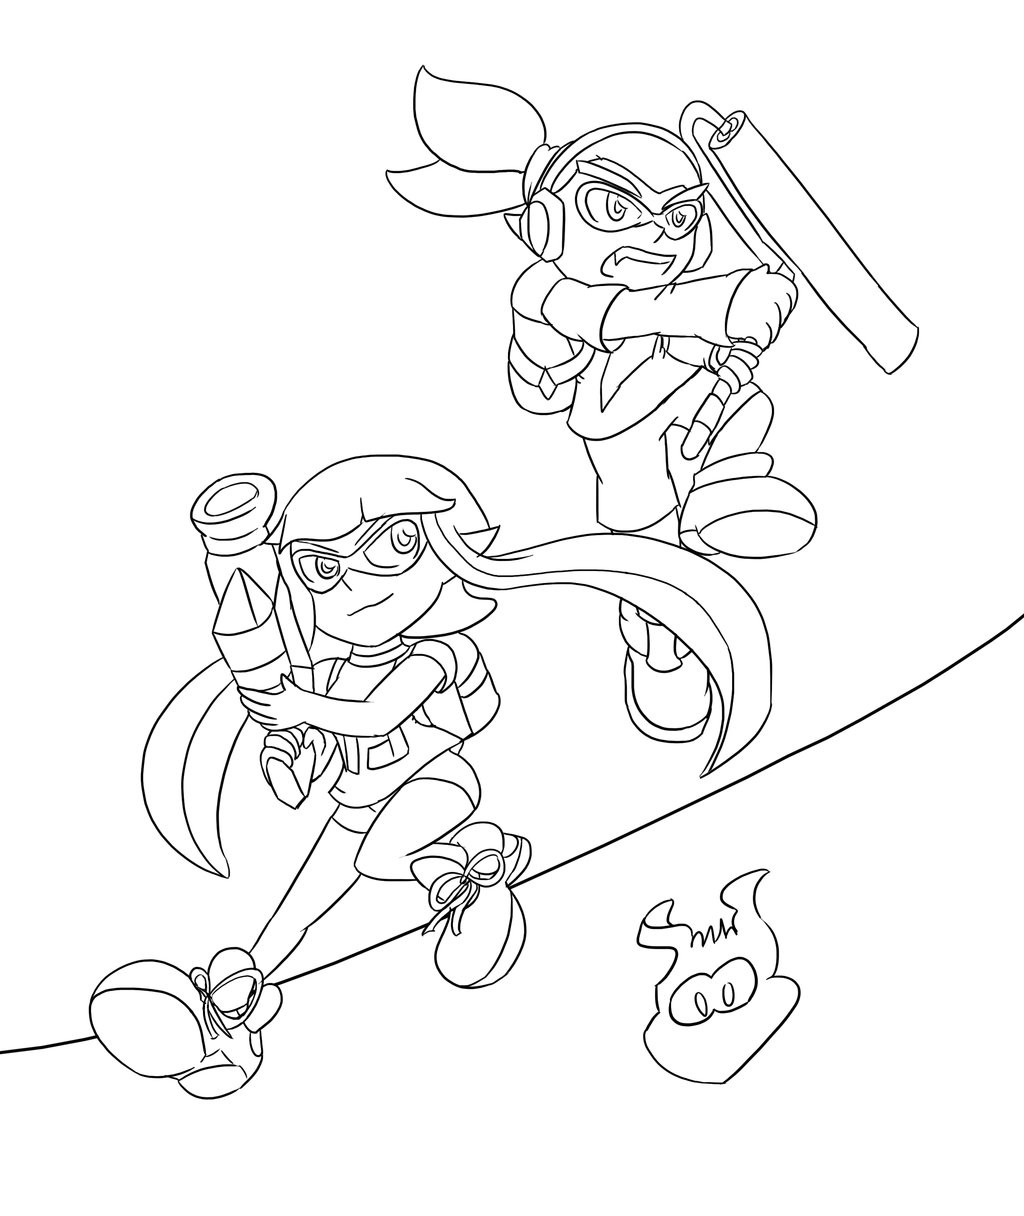 Splatoon Coloring Pages For Boys
 Splatoon Coloring Pages bell rehwoldt